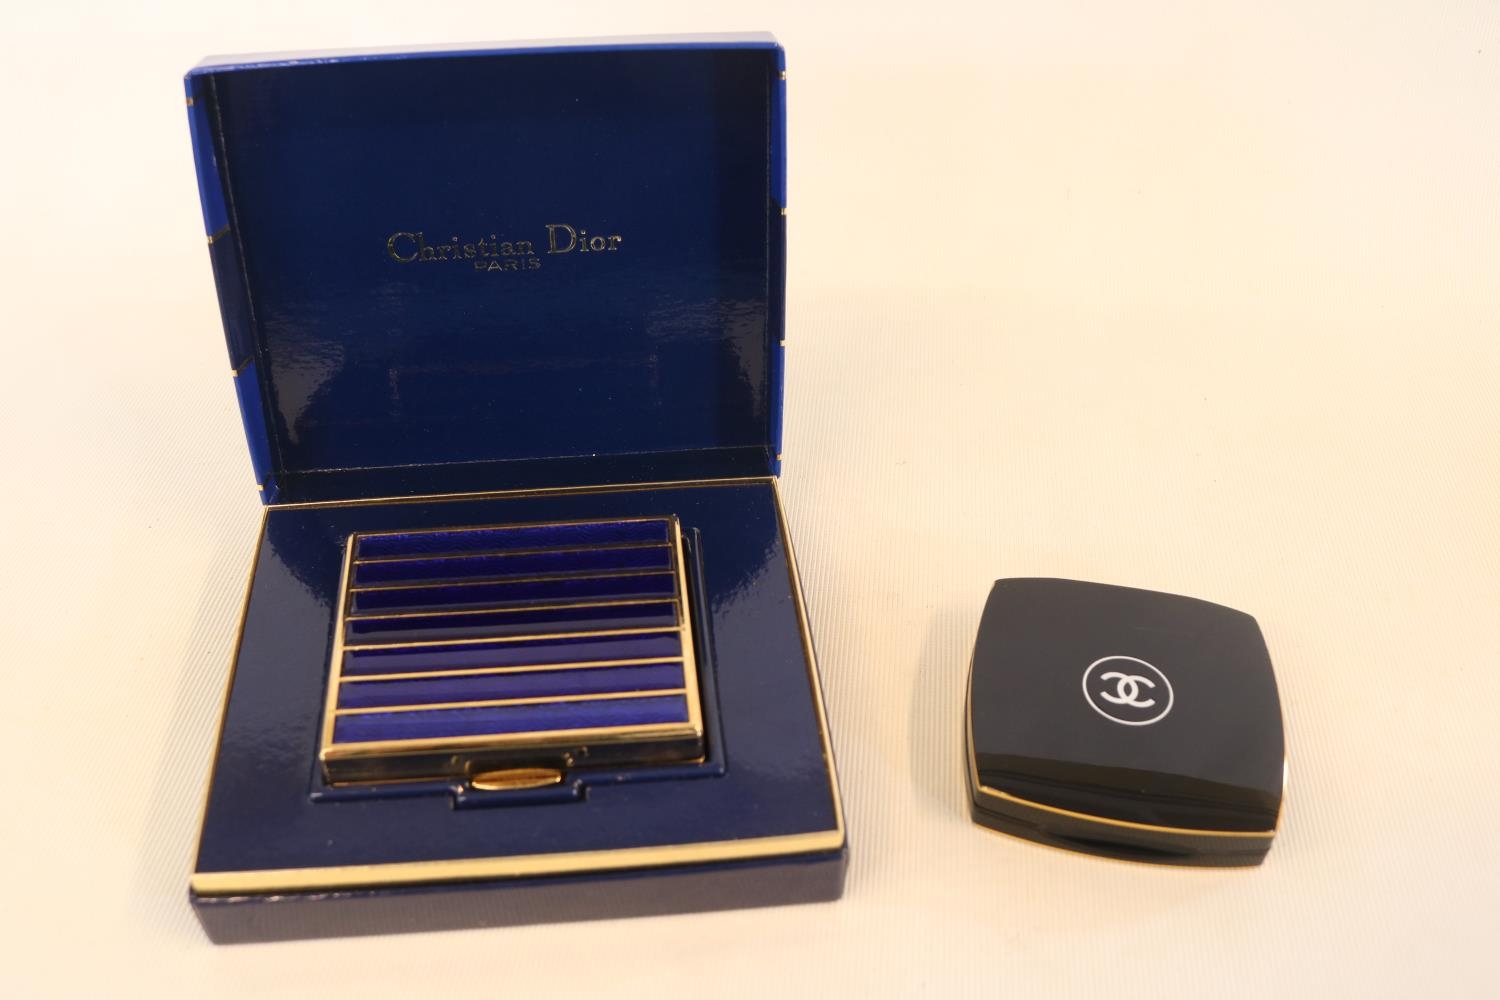 Christian Dior of Paris Refillable Luxury Powder Compact Boxed and a Chanel Compact - Image 2 of 5